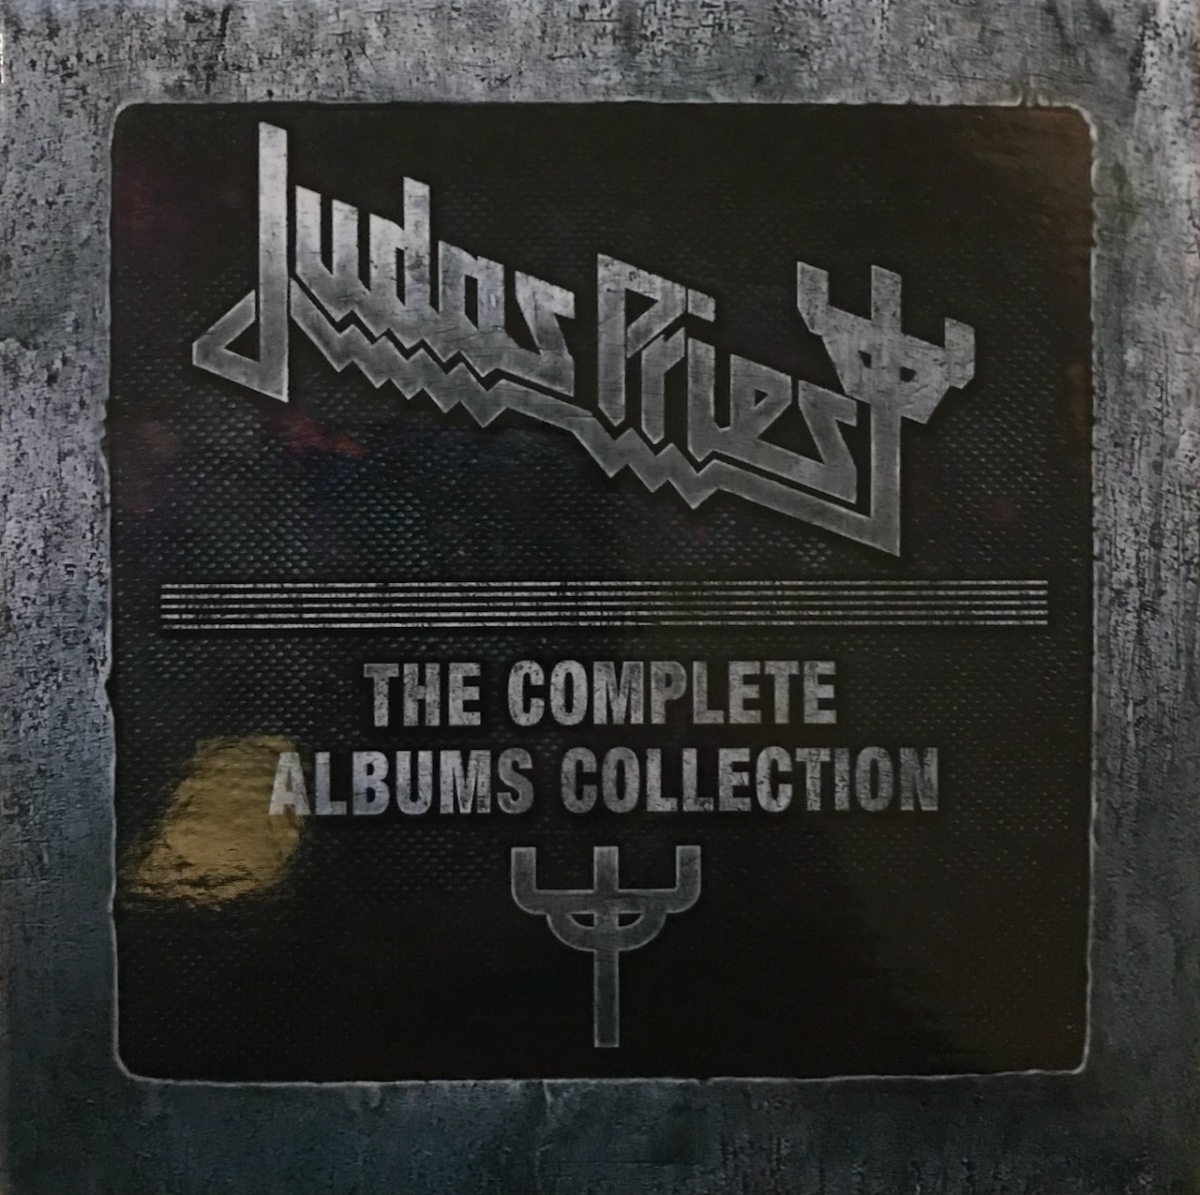 Judas Priest – 'The Complete Albums Collection' – Box Set Review 